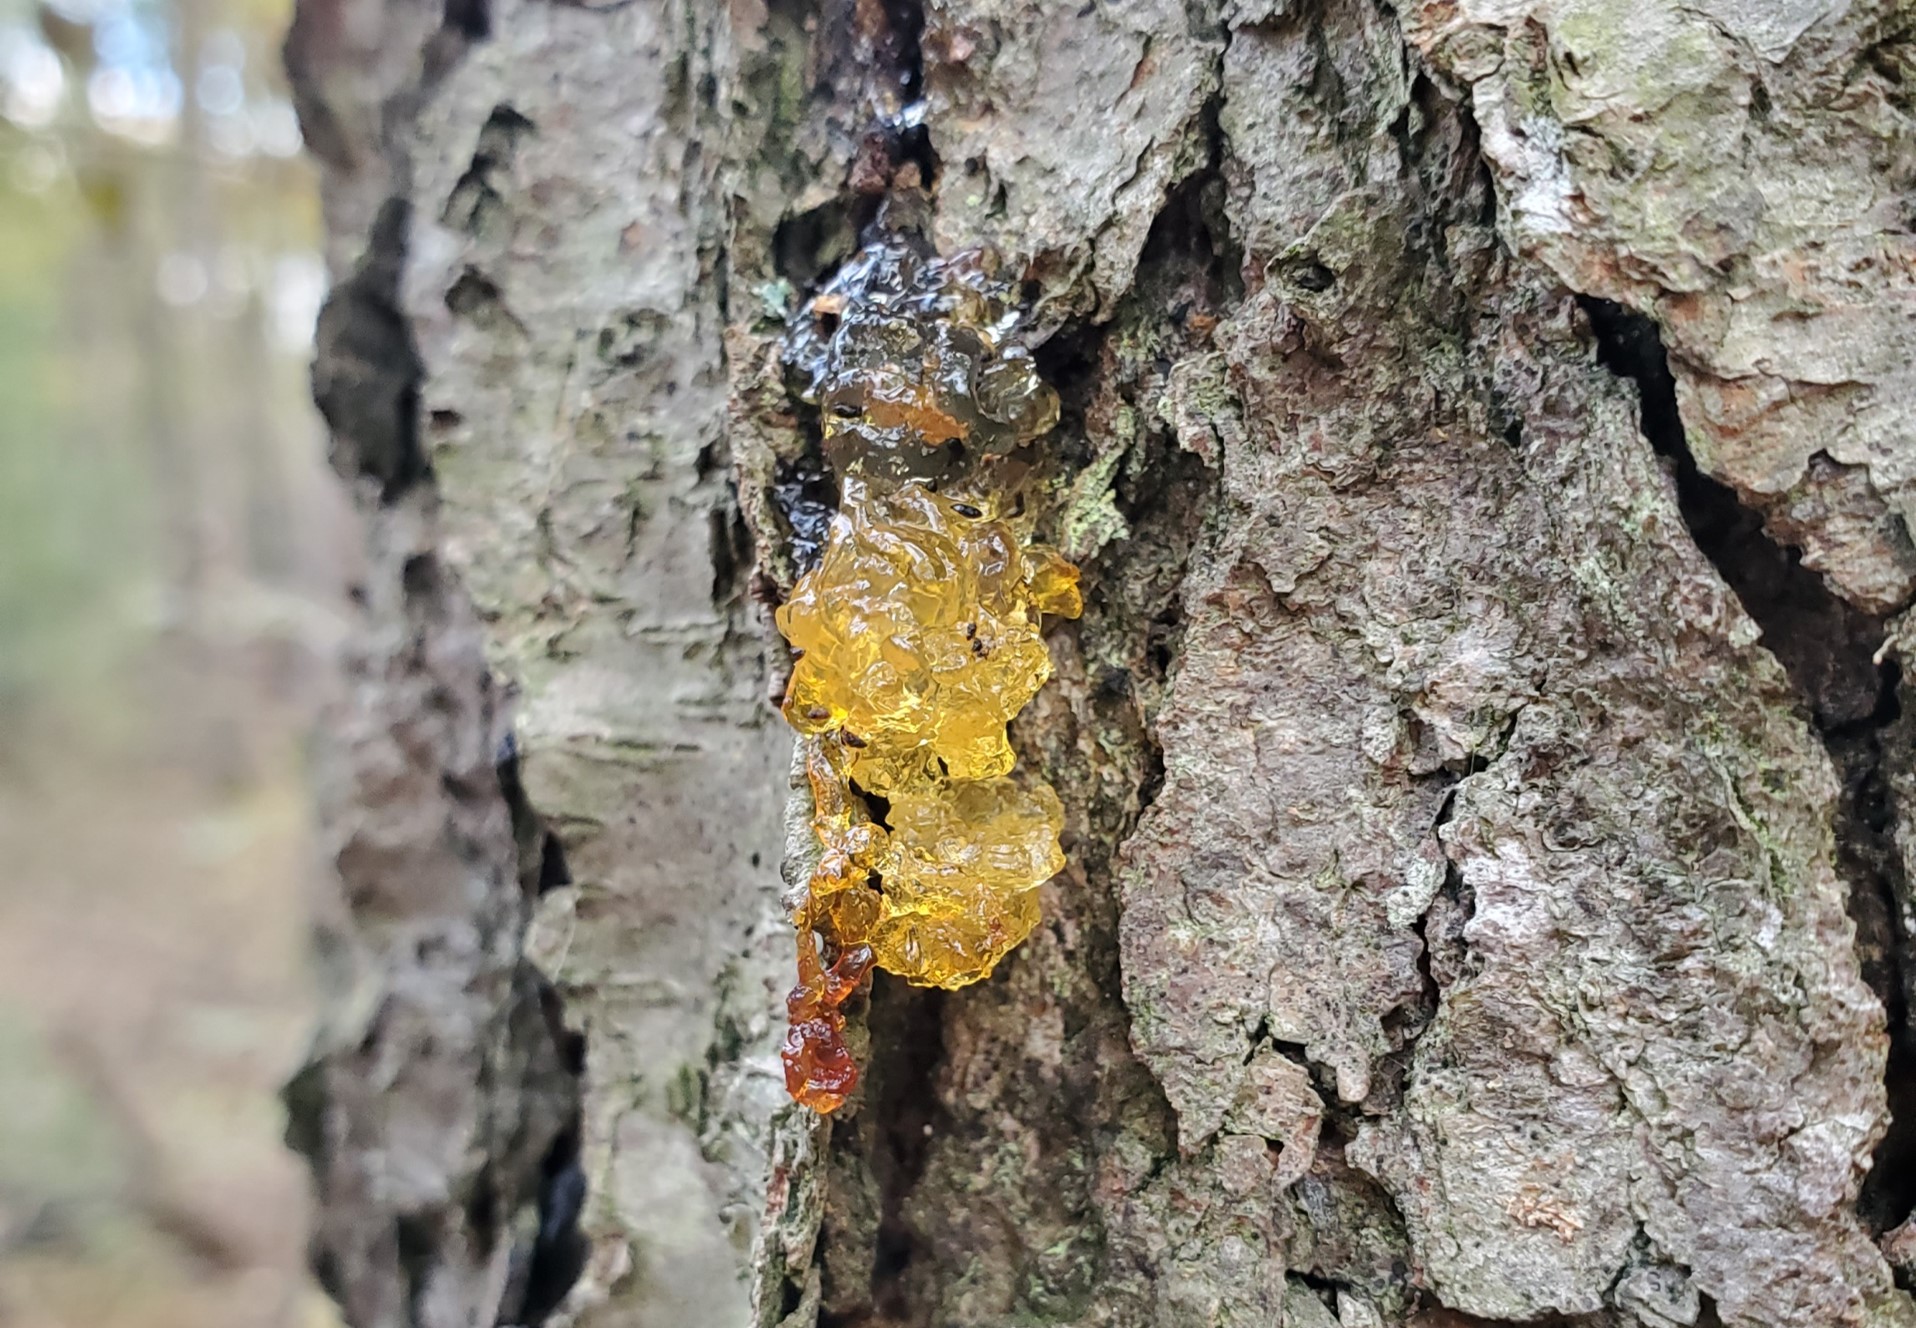 Jelly-like substance on a pine tree trunk